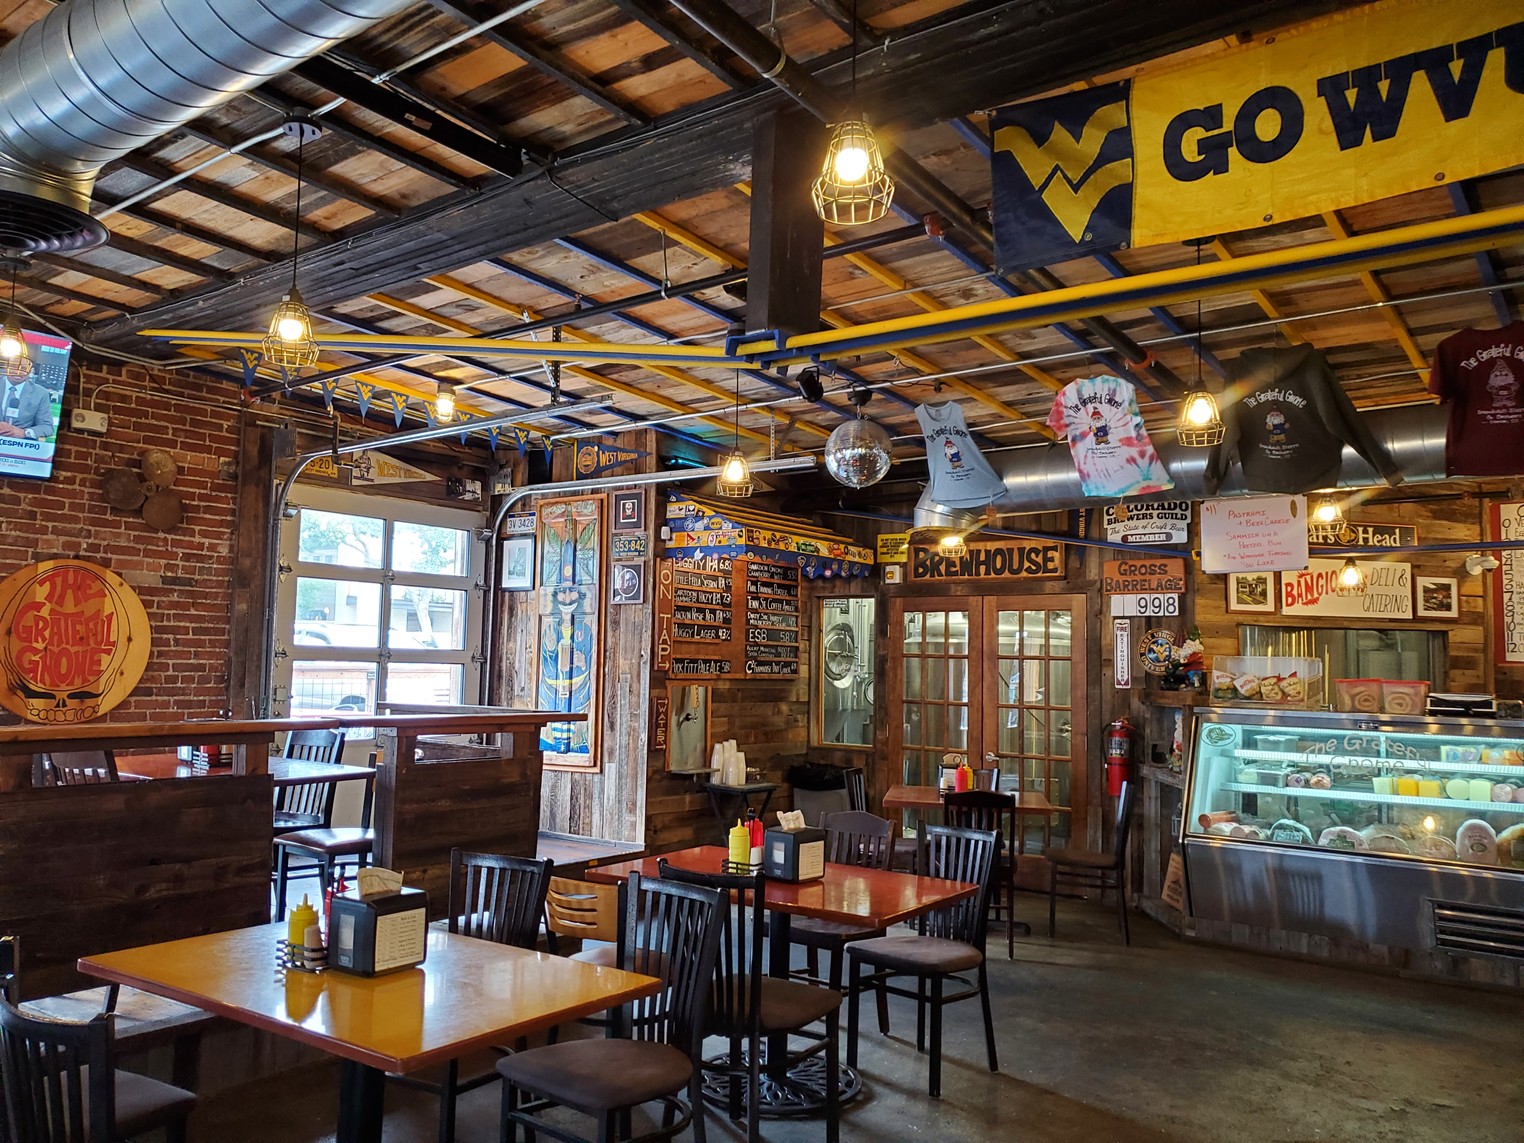 Best Brewery in a Sandwich Joint 2019 The Grateful Gnome Sandwich Shoppe and Brewery Best of Denver® Best Restaurants, Bars, Clubs, Music and Stores in Denver Westword photo image